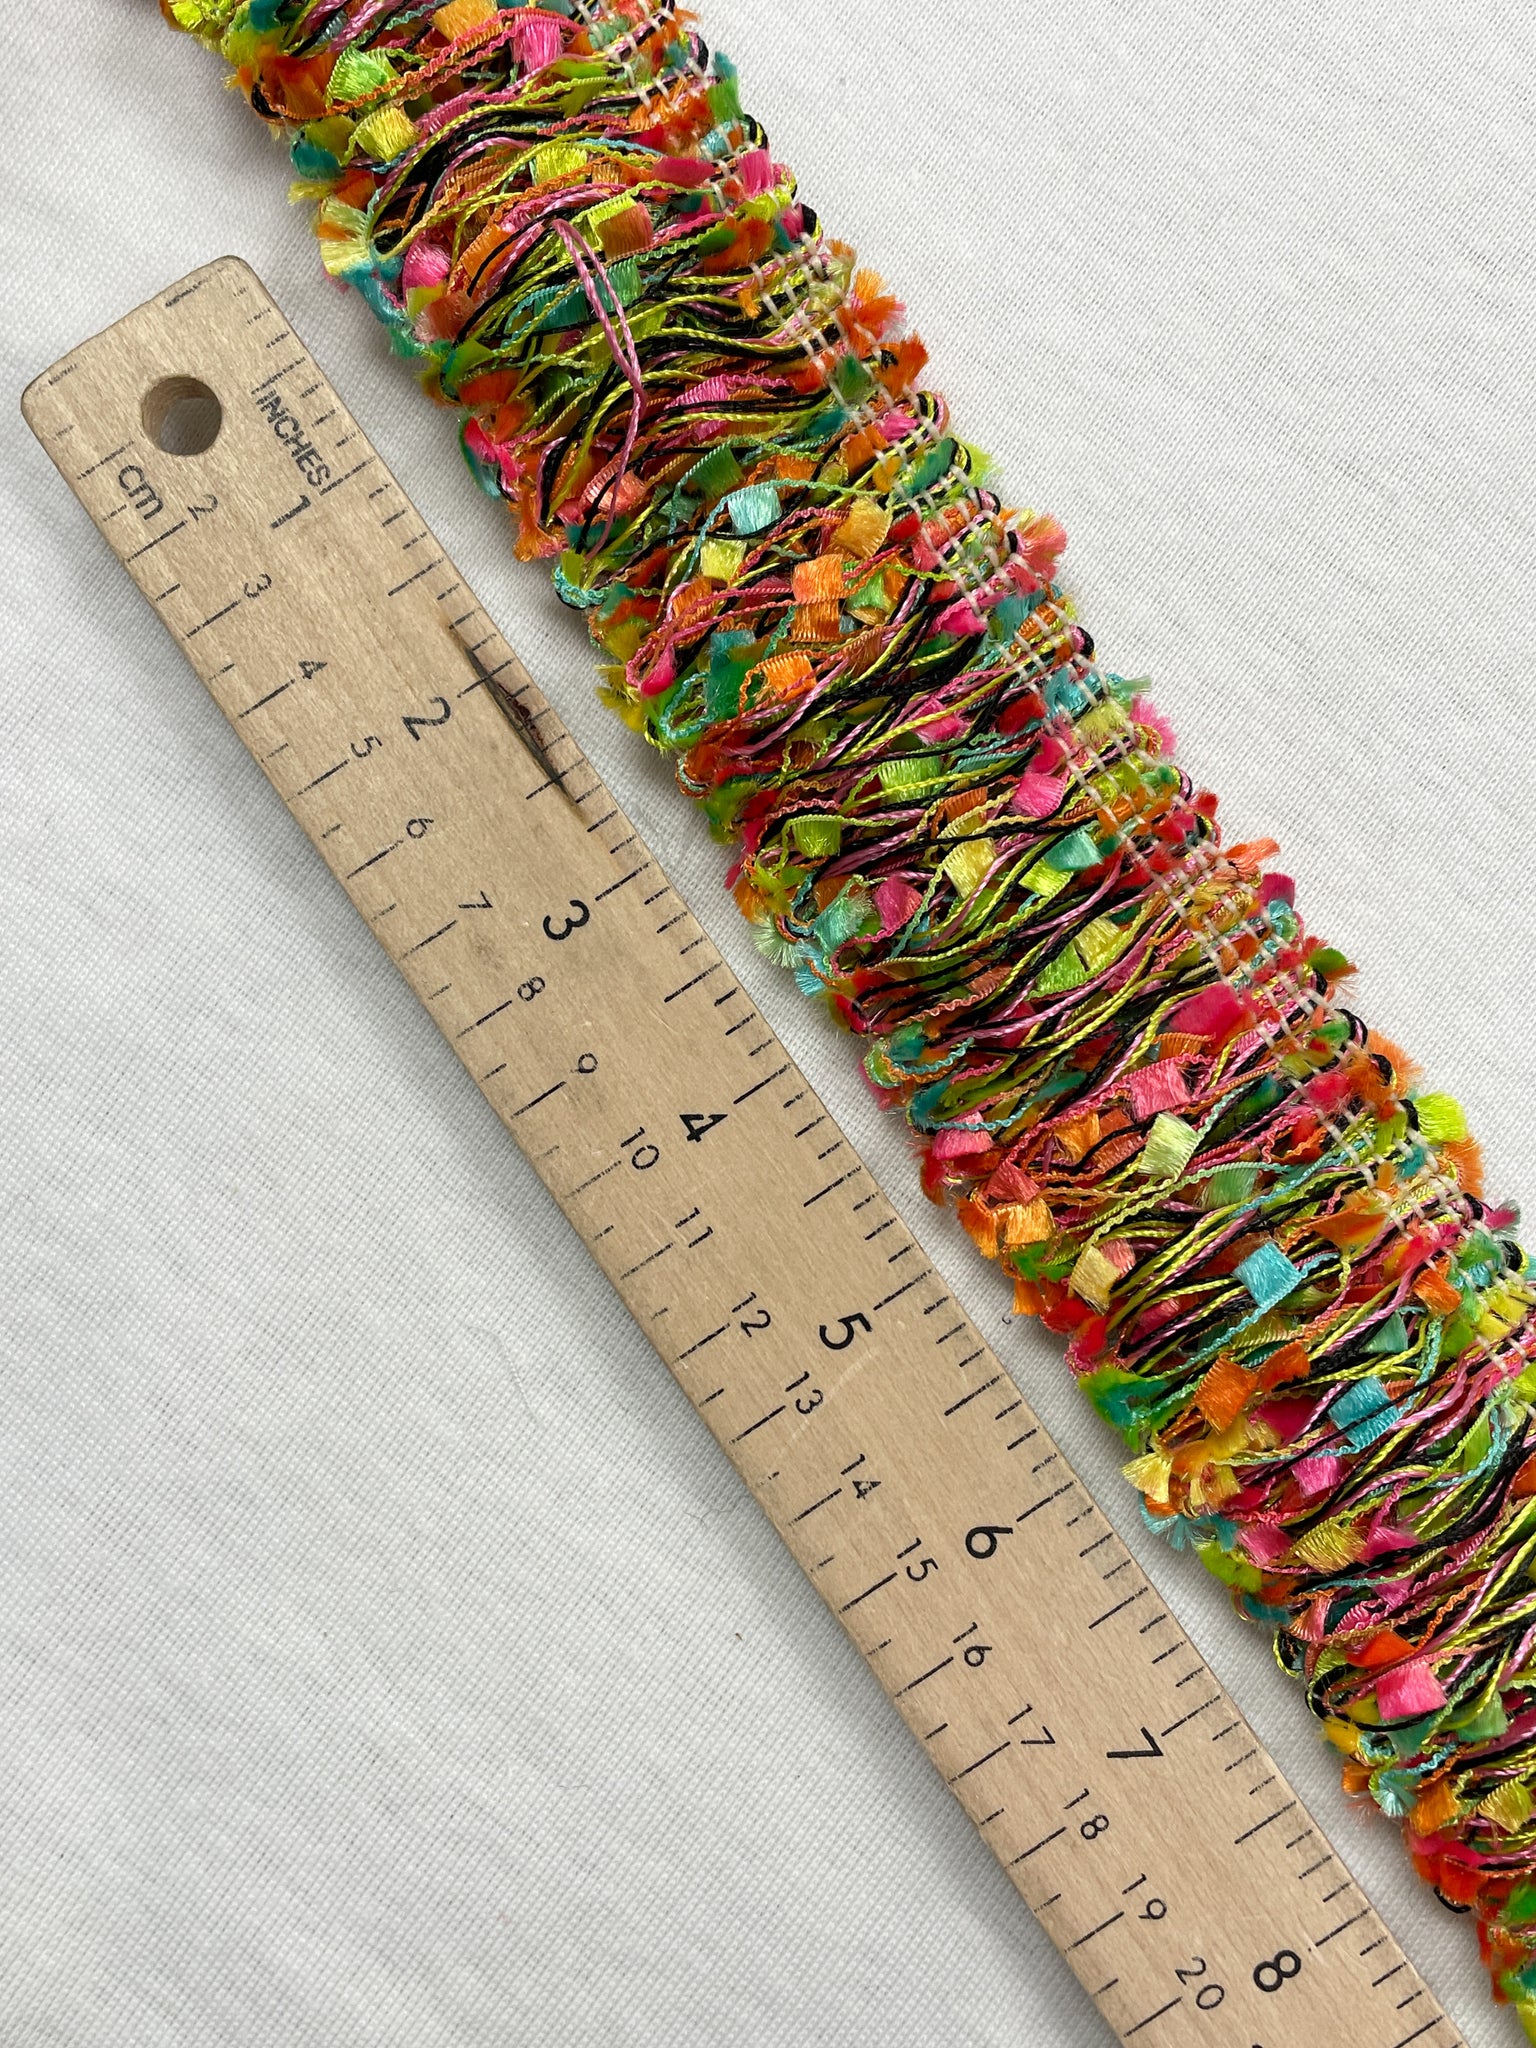 2 1/8 YD Polyester Looped Fringe Trim - Multi Colors